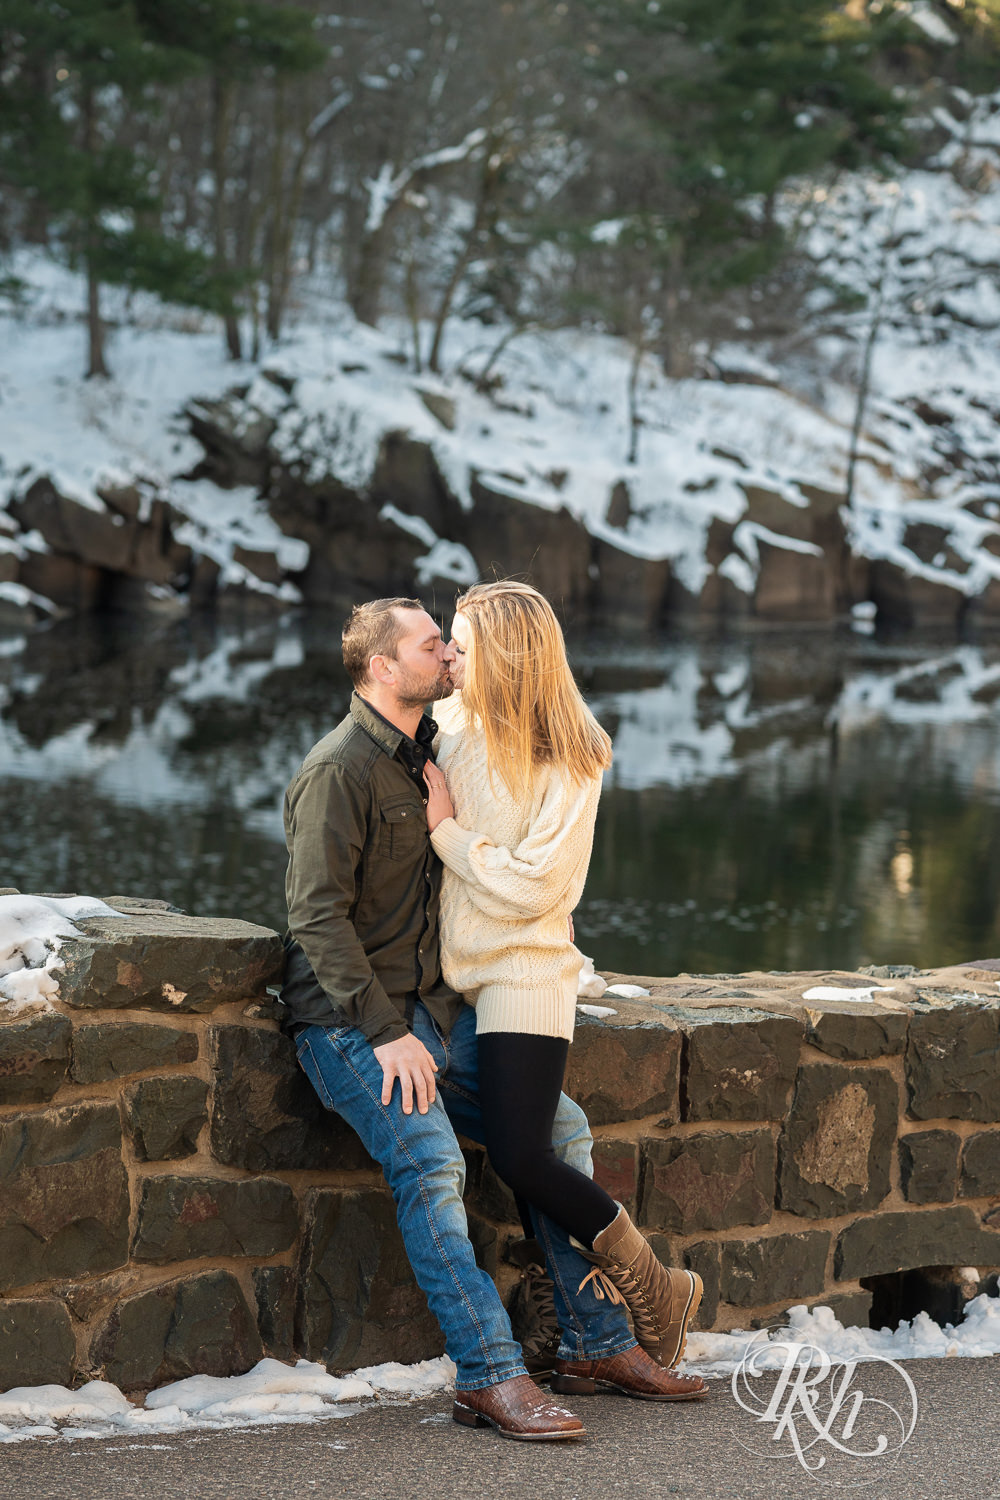 Man in jeans and green shirt and woman in a white sweater kiss in front of the river during Taylor's Falls engagement photography session.